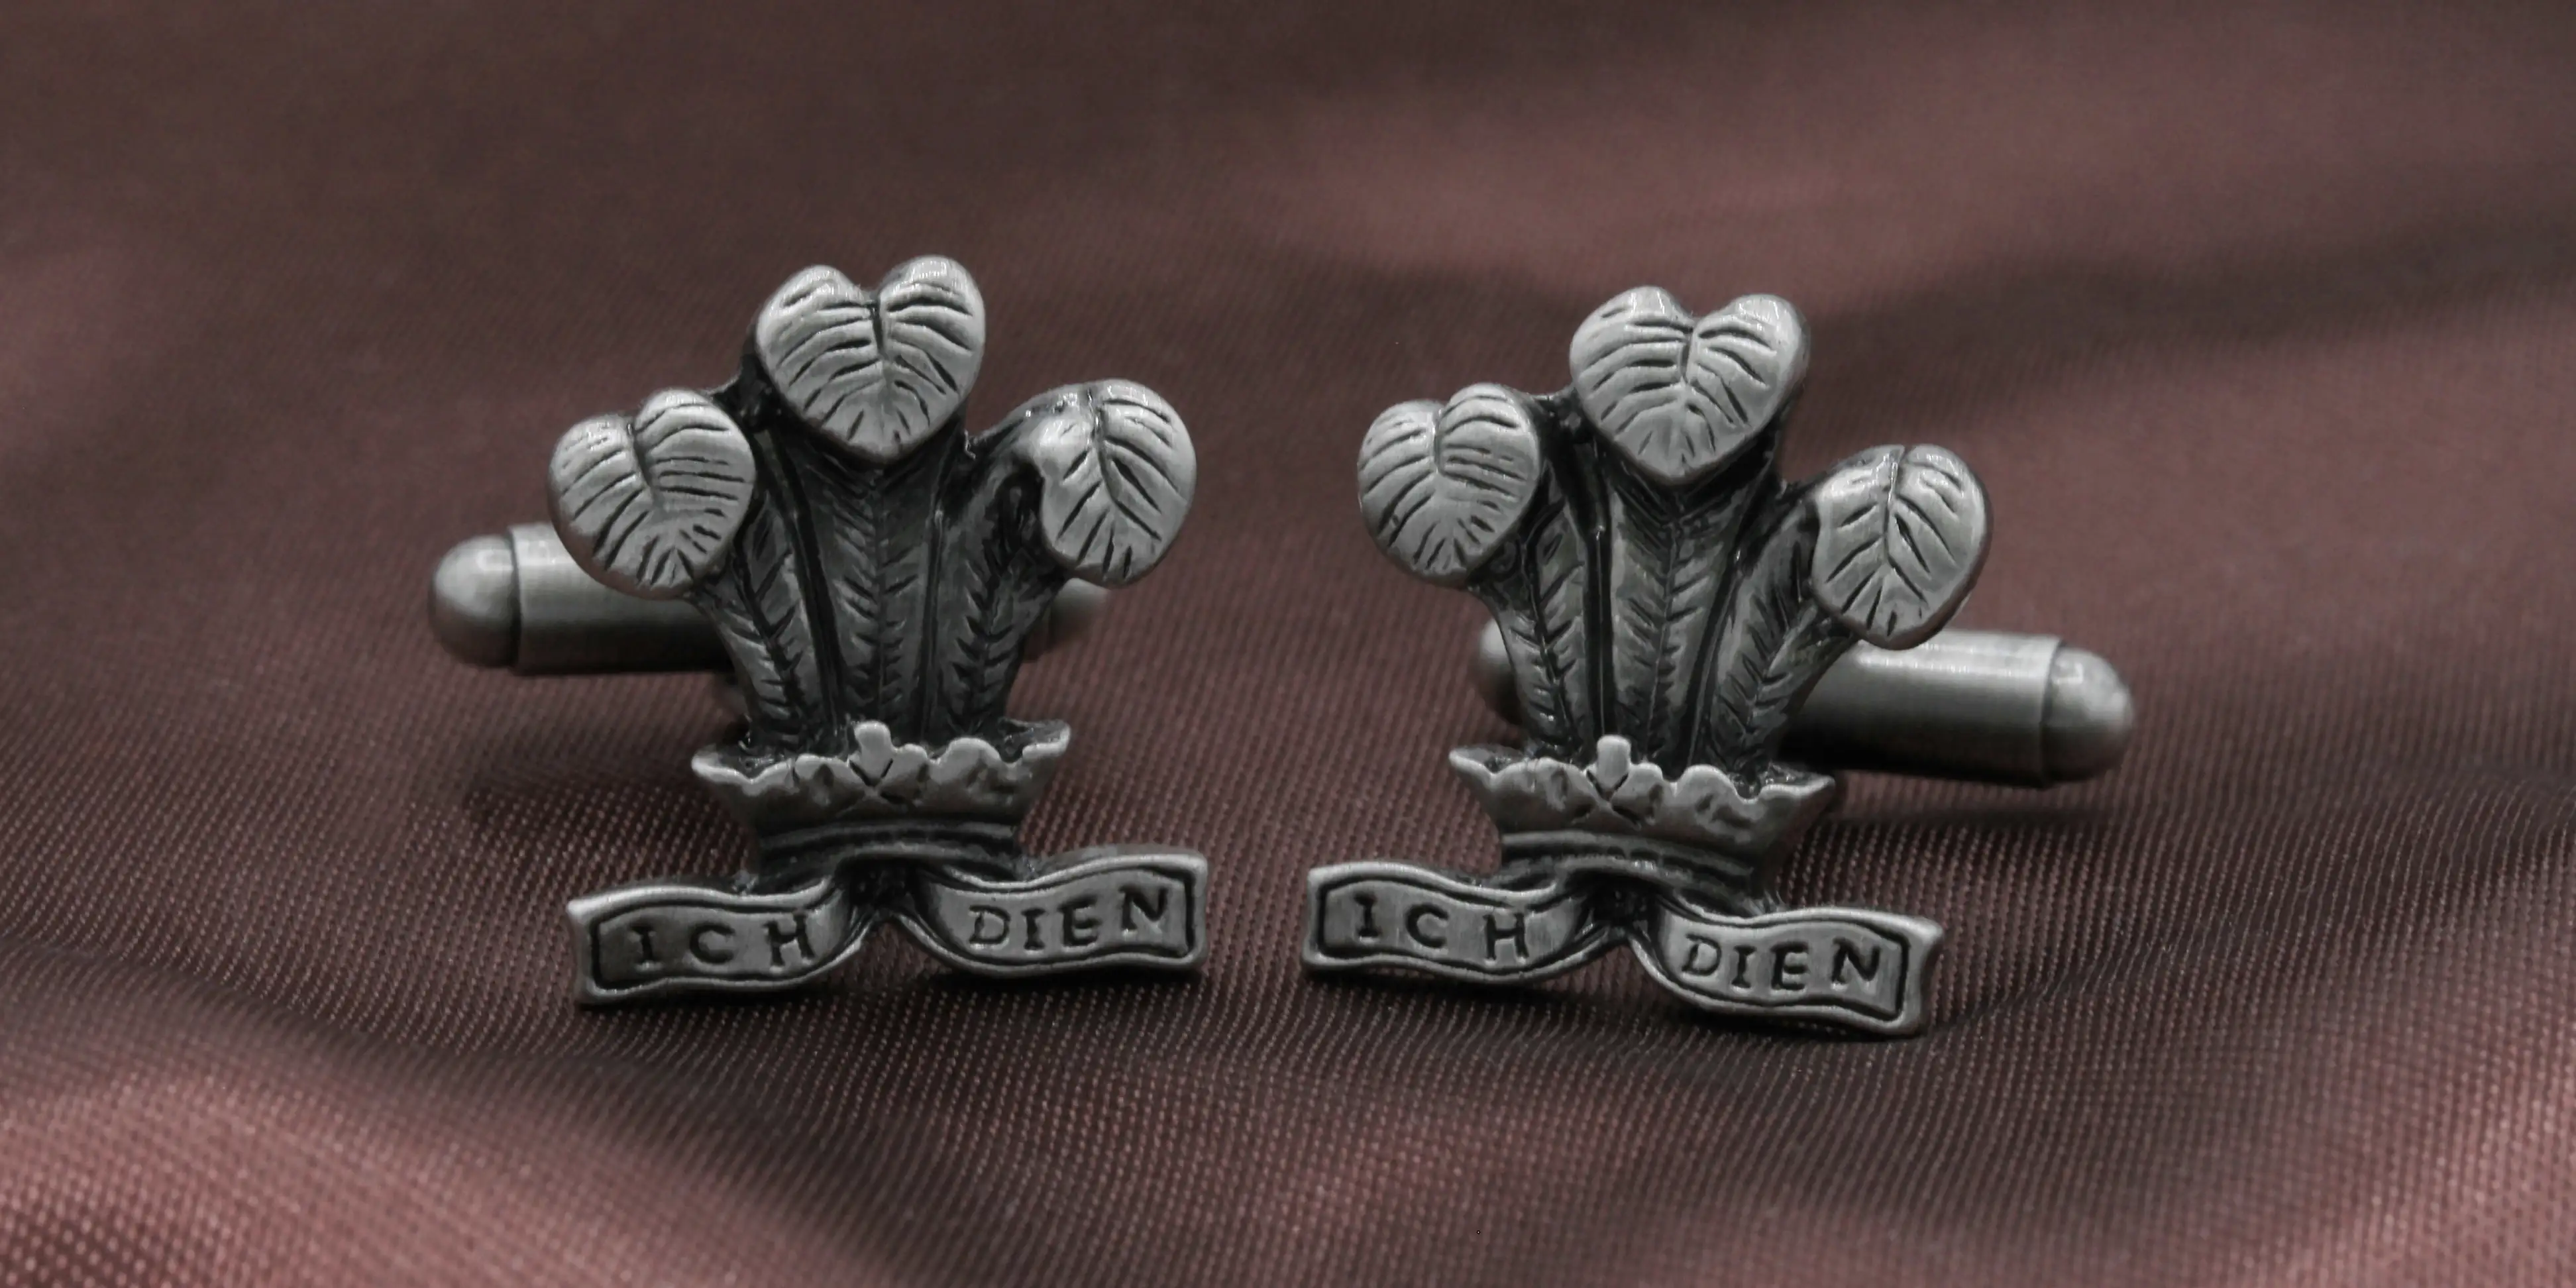 Main category image for Cufflinks and Brooches featuring a pair of cufflinks of the Price of Wales feathers.